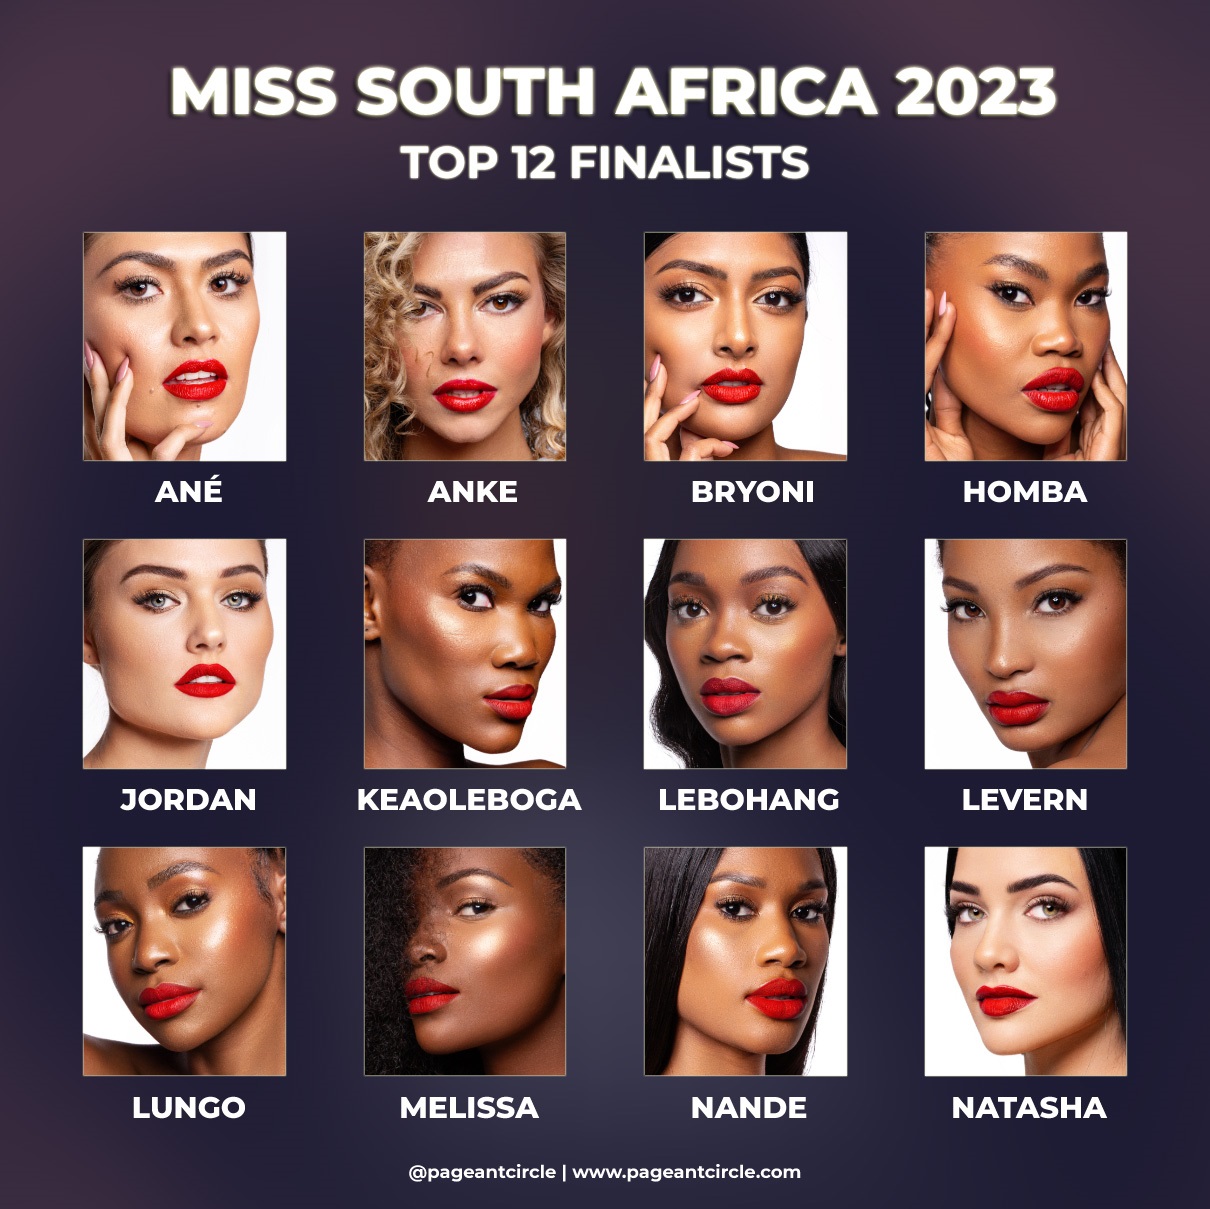 Miss South Africa 2023 Meet the Top 12 finalists